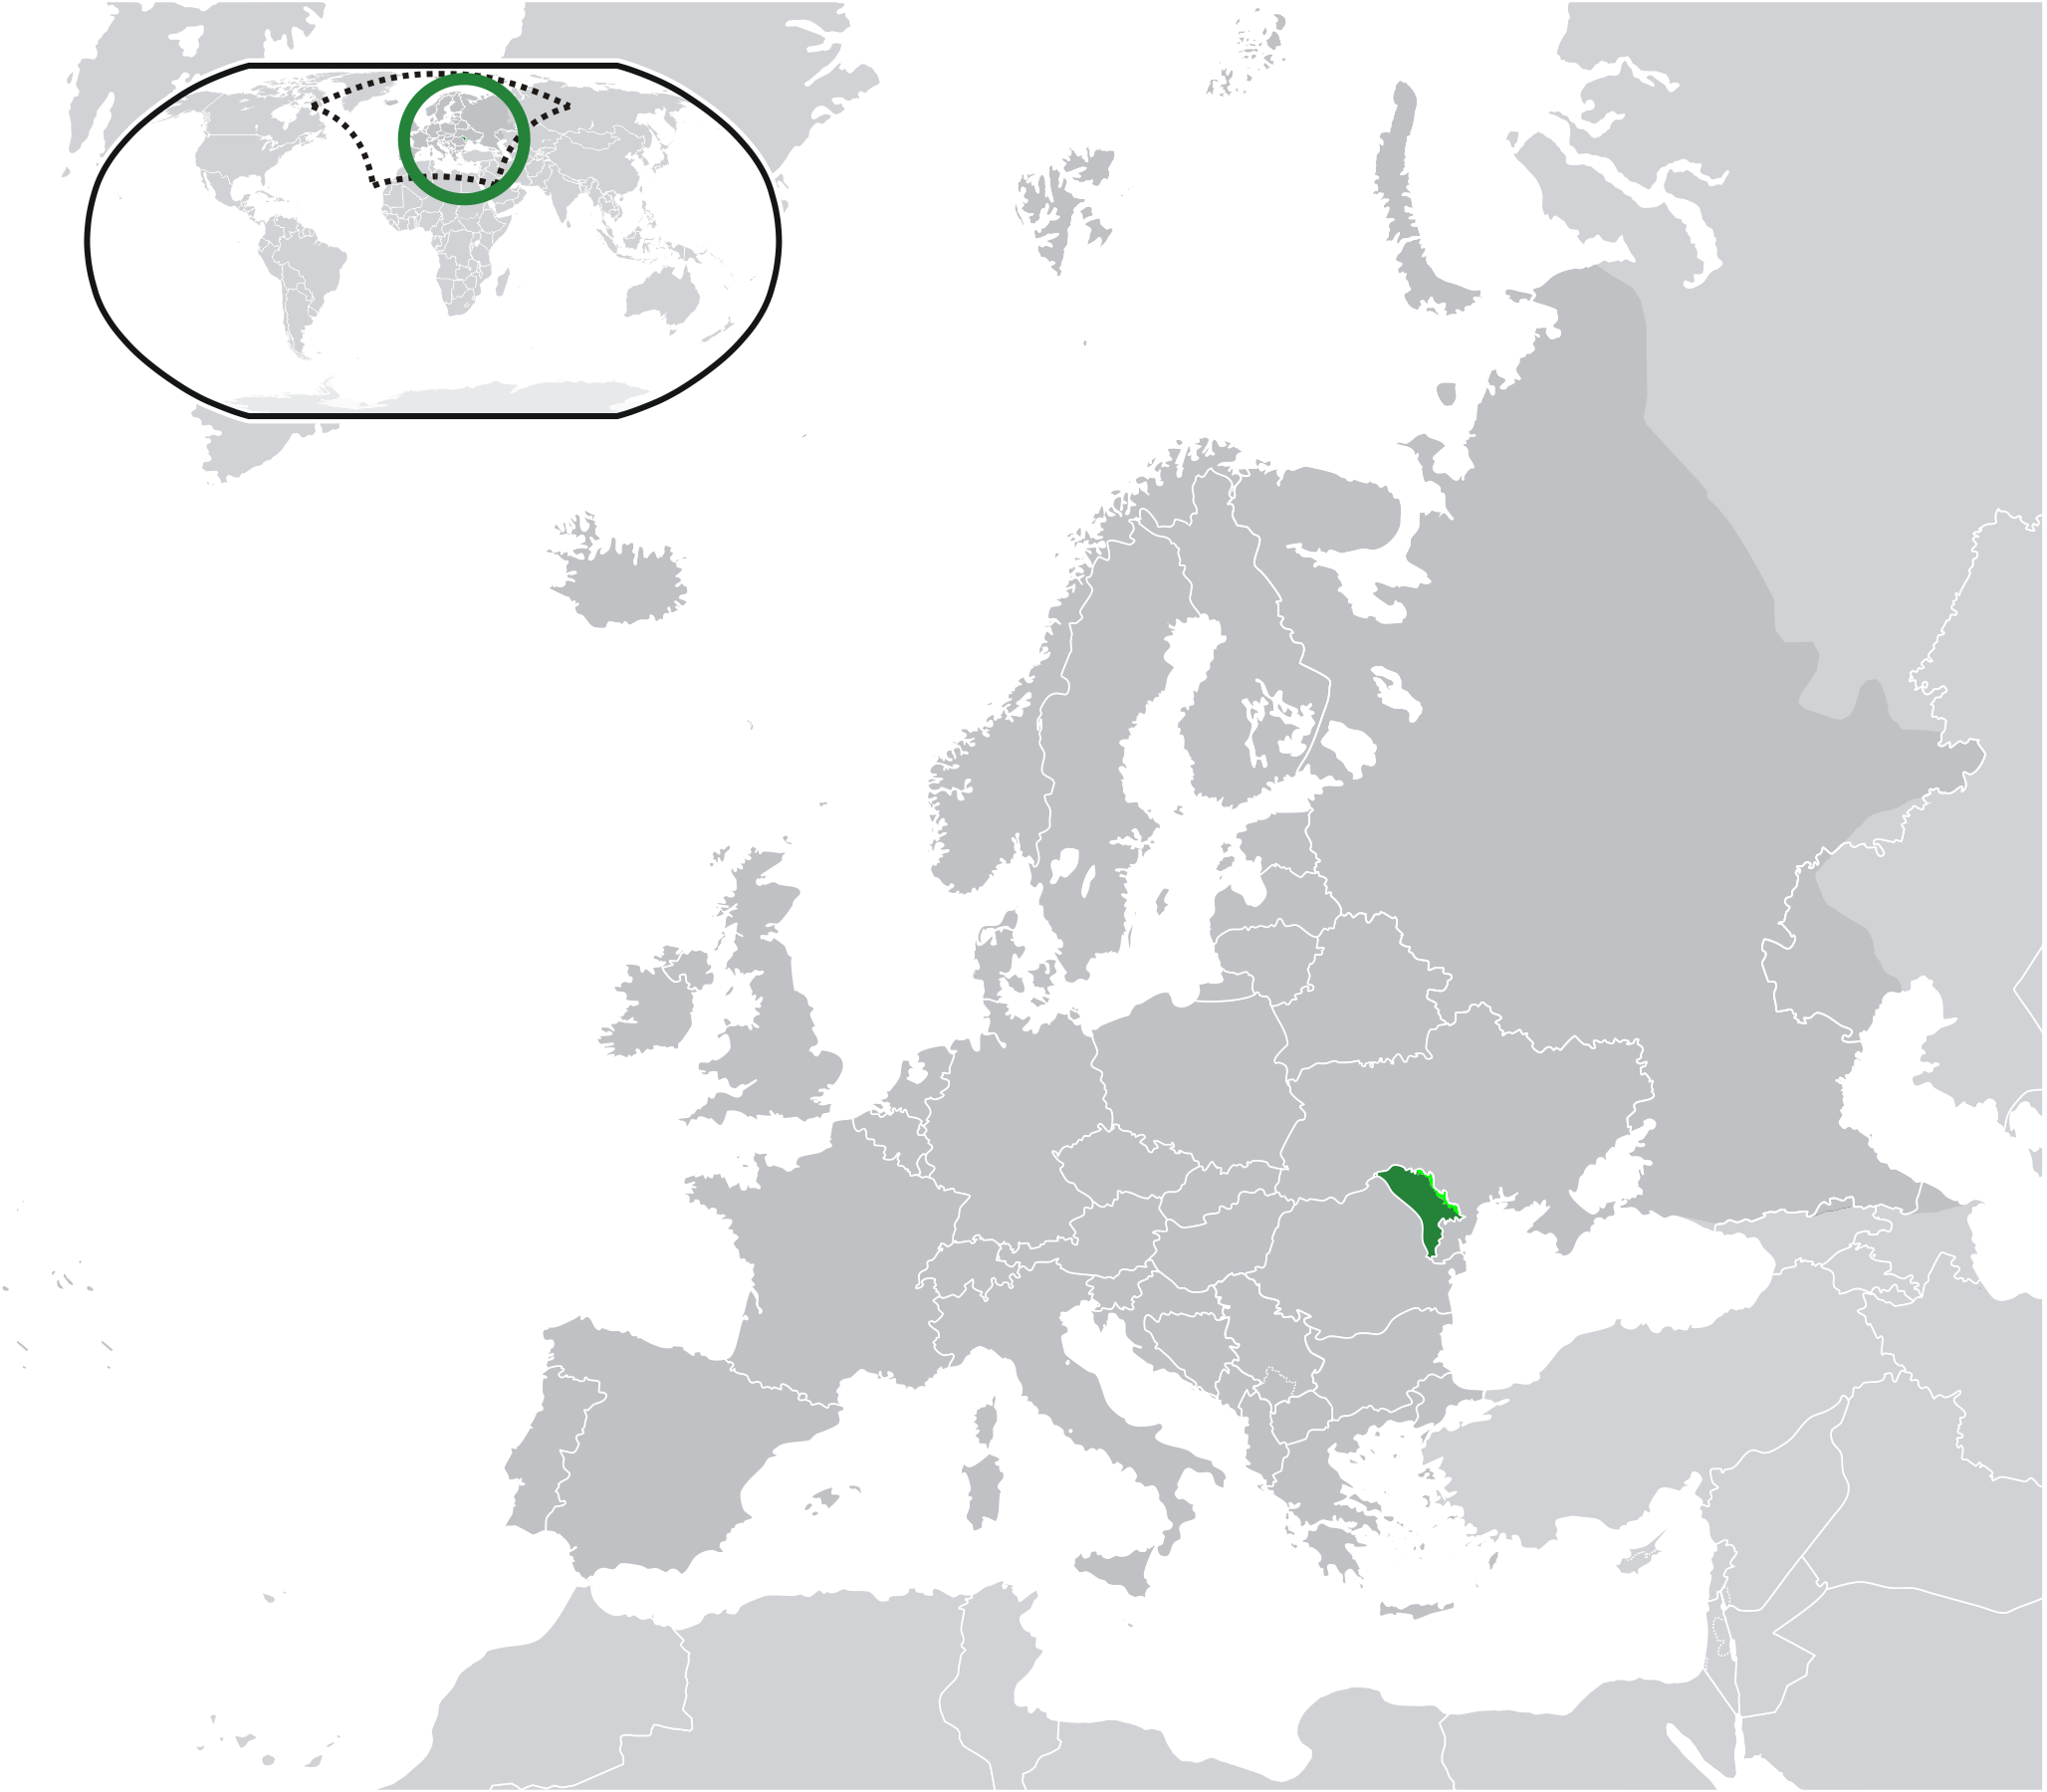 Transnistria is in light green.